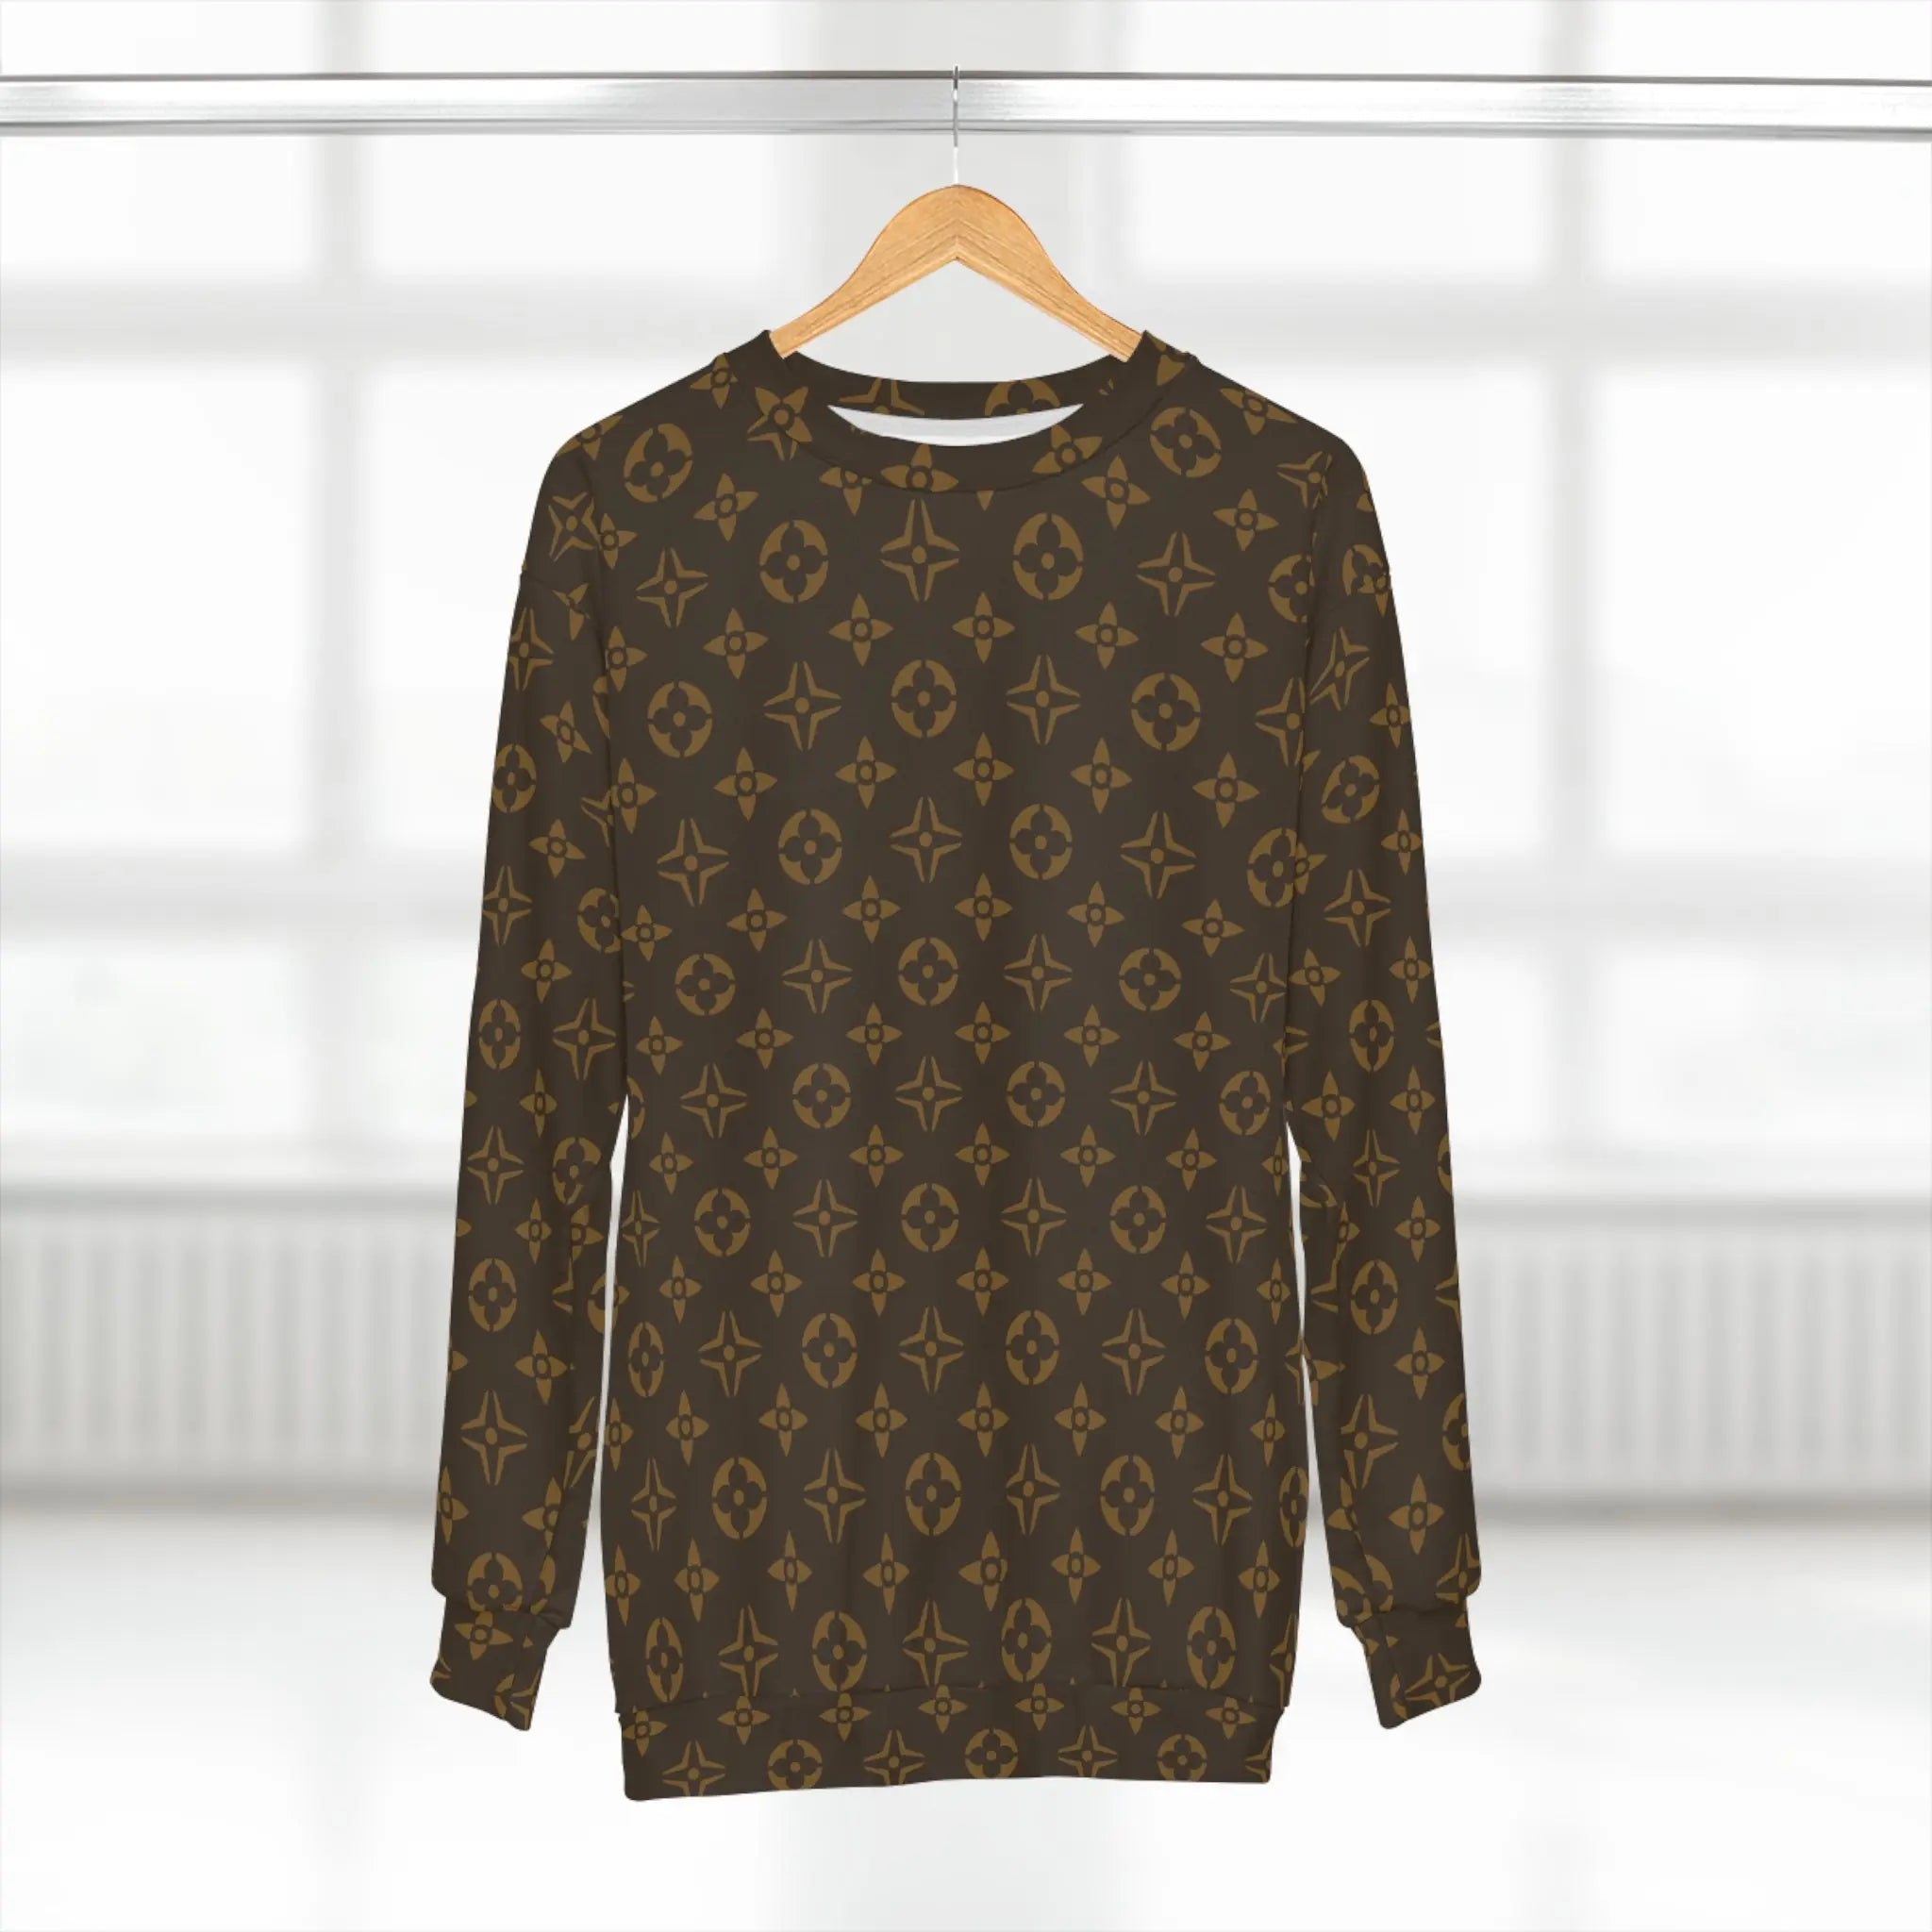  Abby Pattern Icons in Brown Unisex Fashion Sweatshirt, Sweatshirt Sweater, Streetwear Sweatshirt Sweatshirt